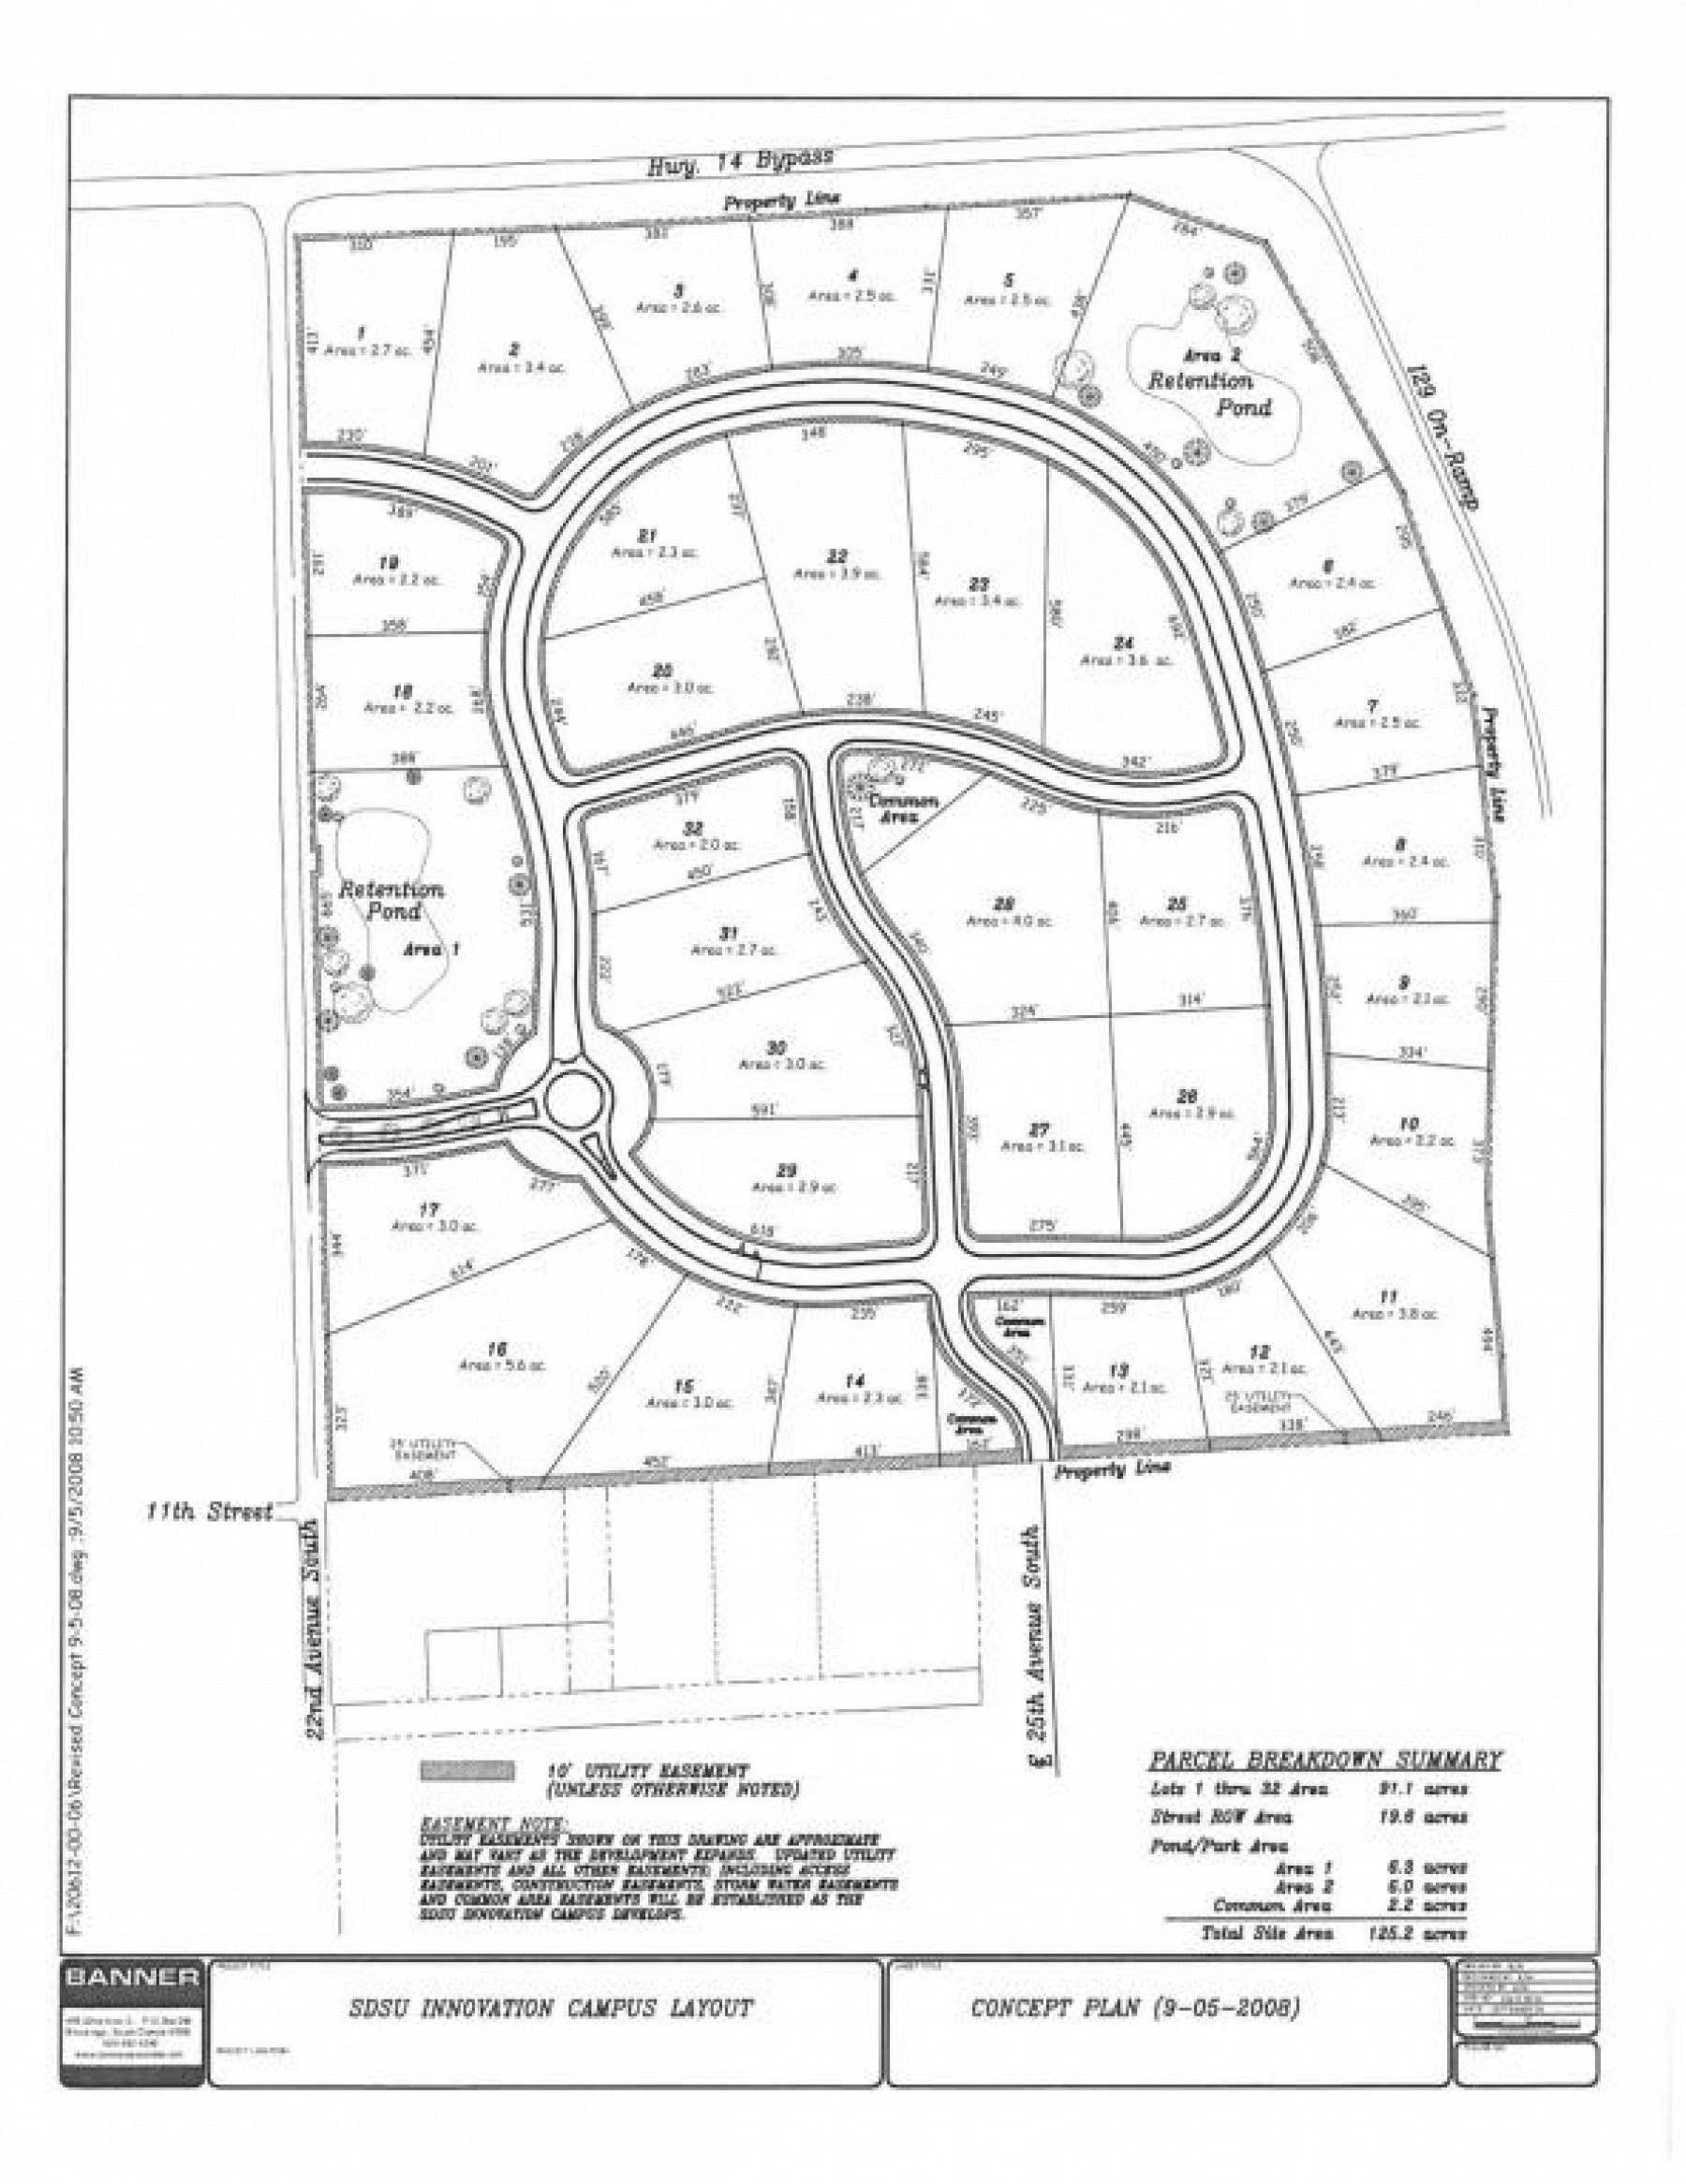 Lot 6 Innovation Campus, Brookings, SD 57006